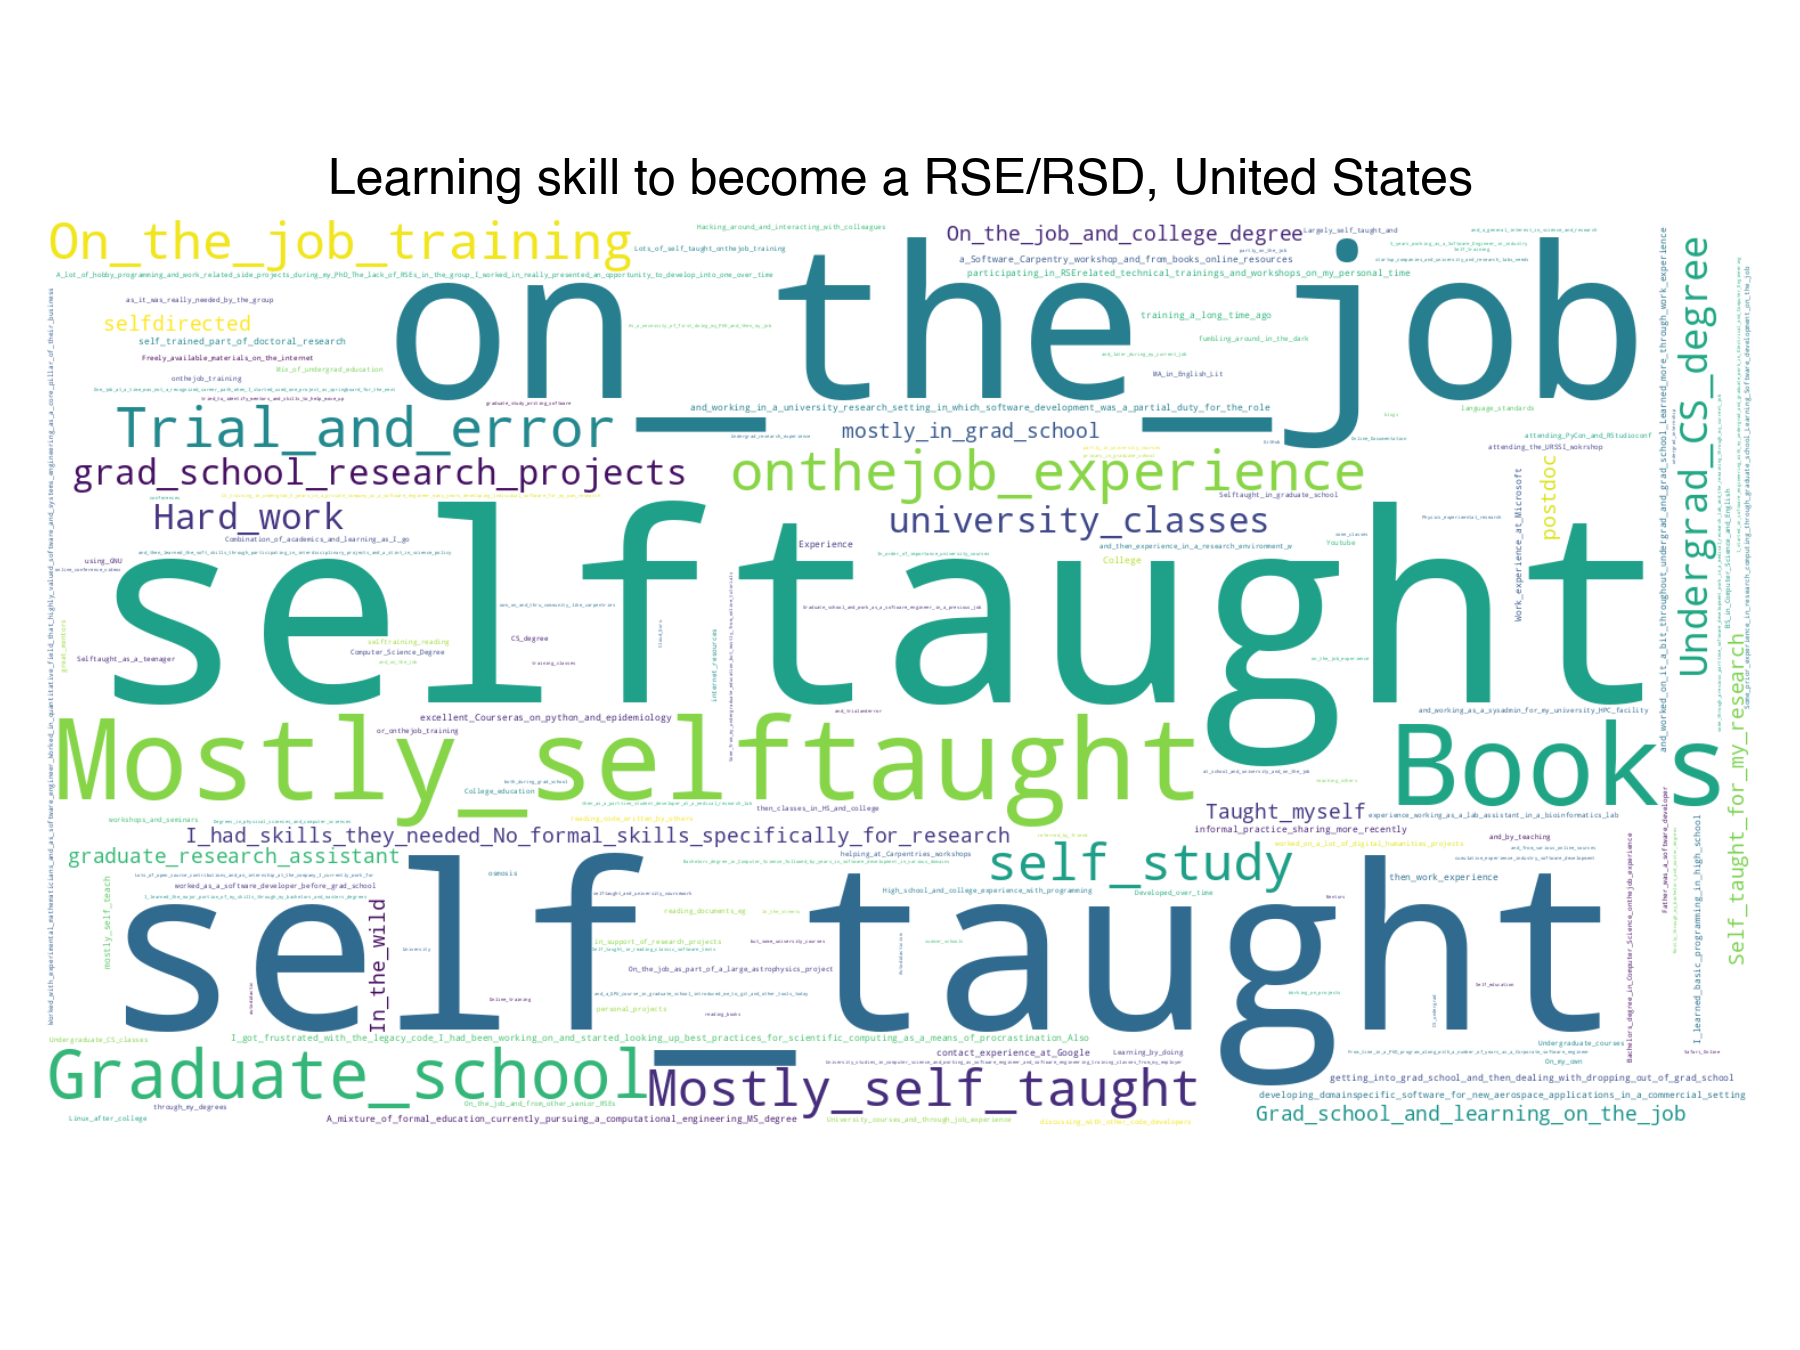 learning-skills-rse-rsd-wordcloud